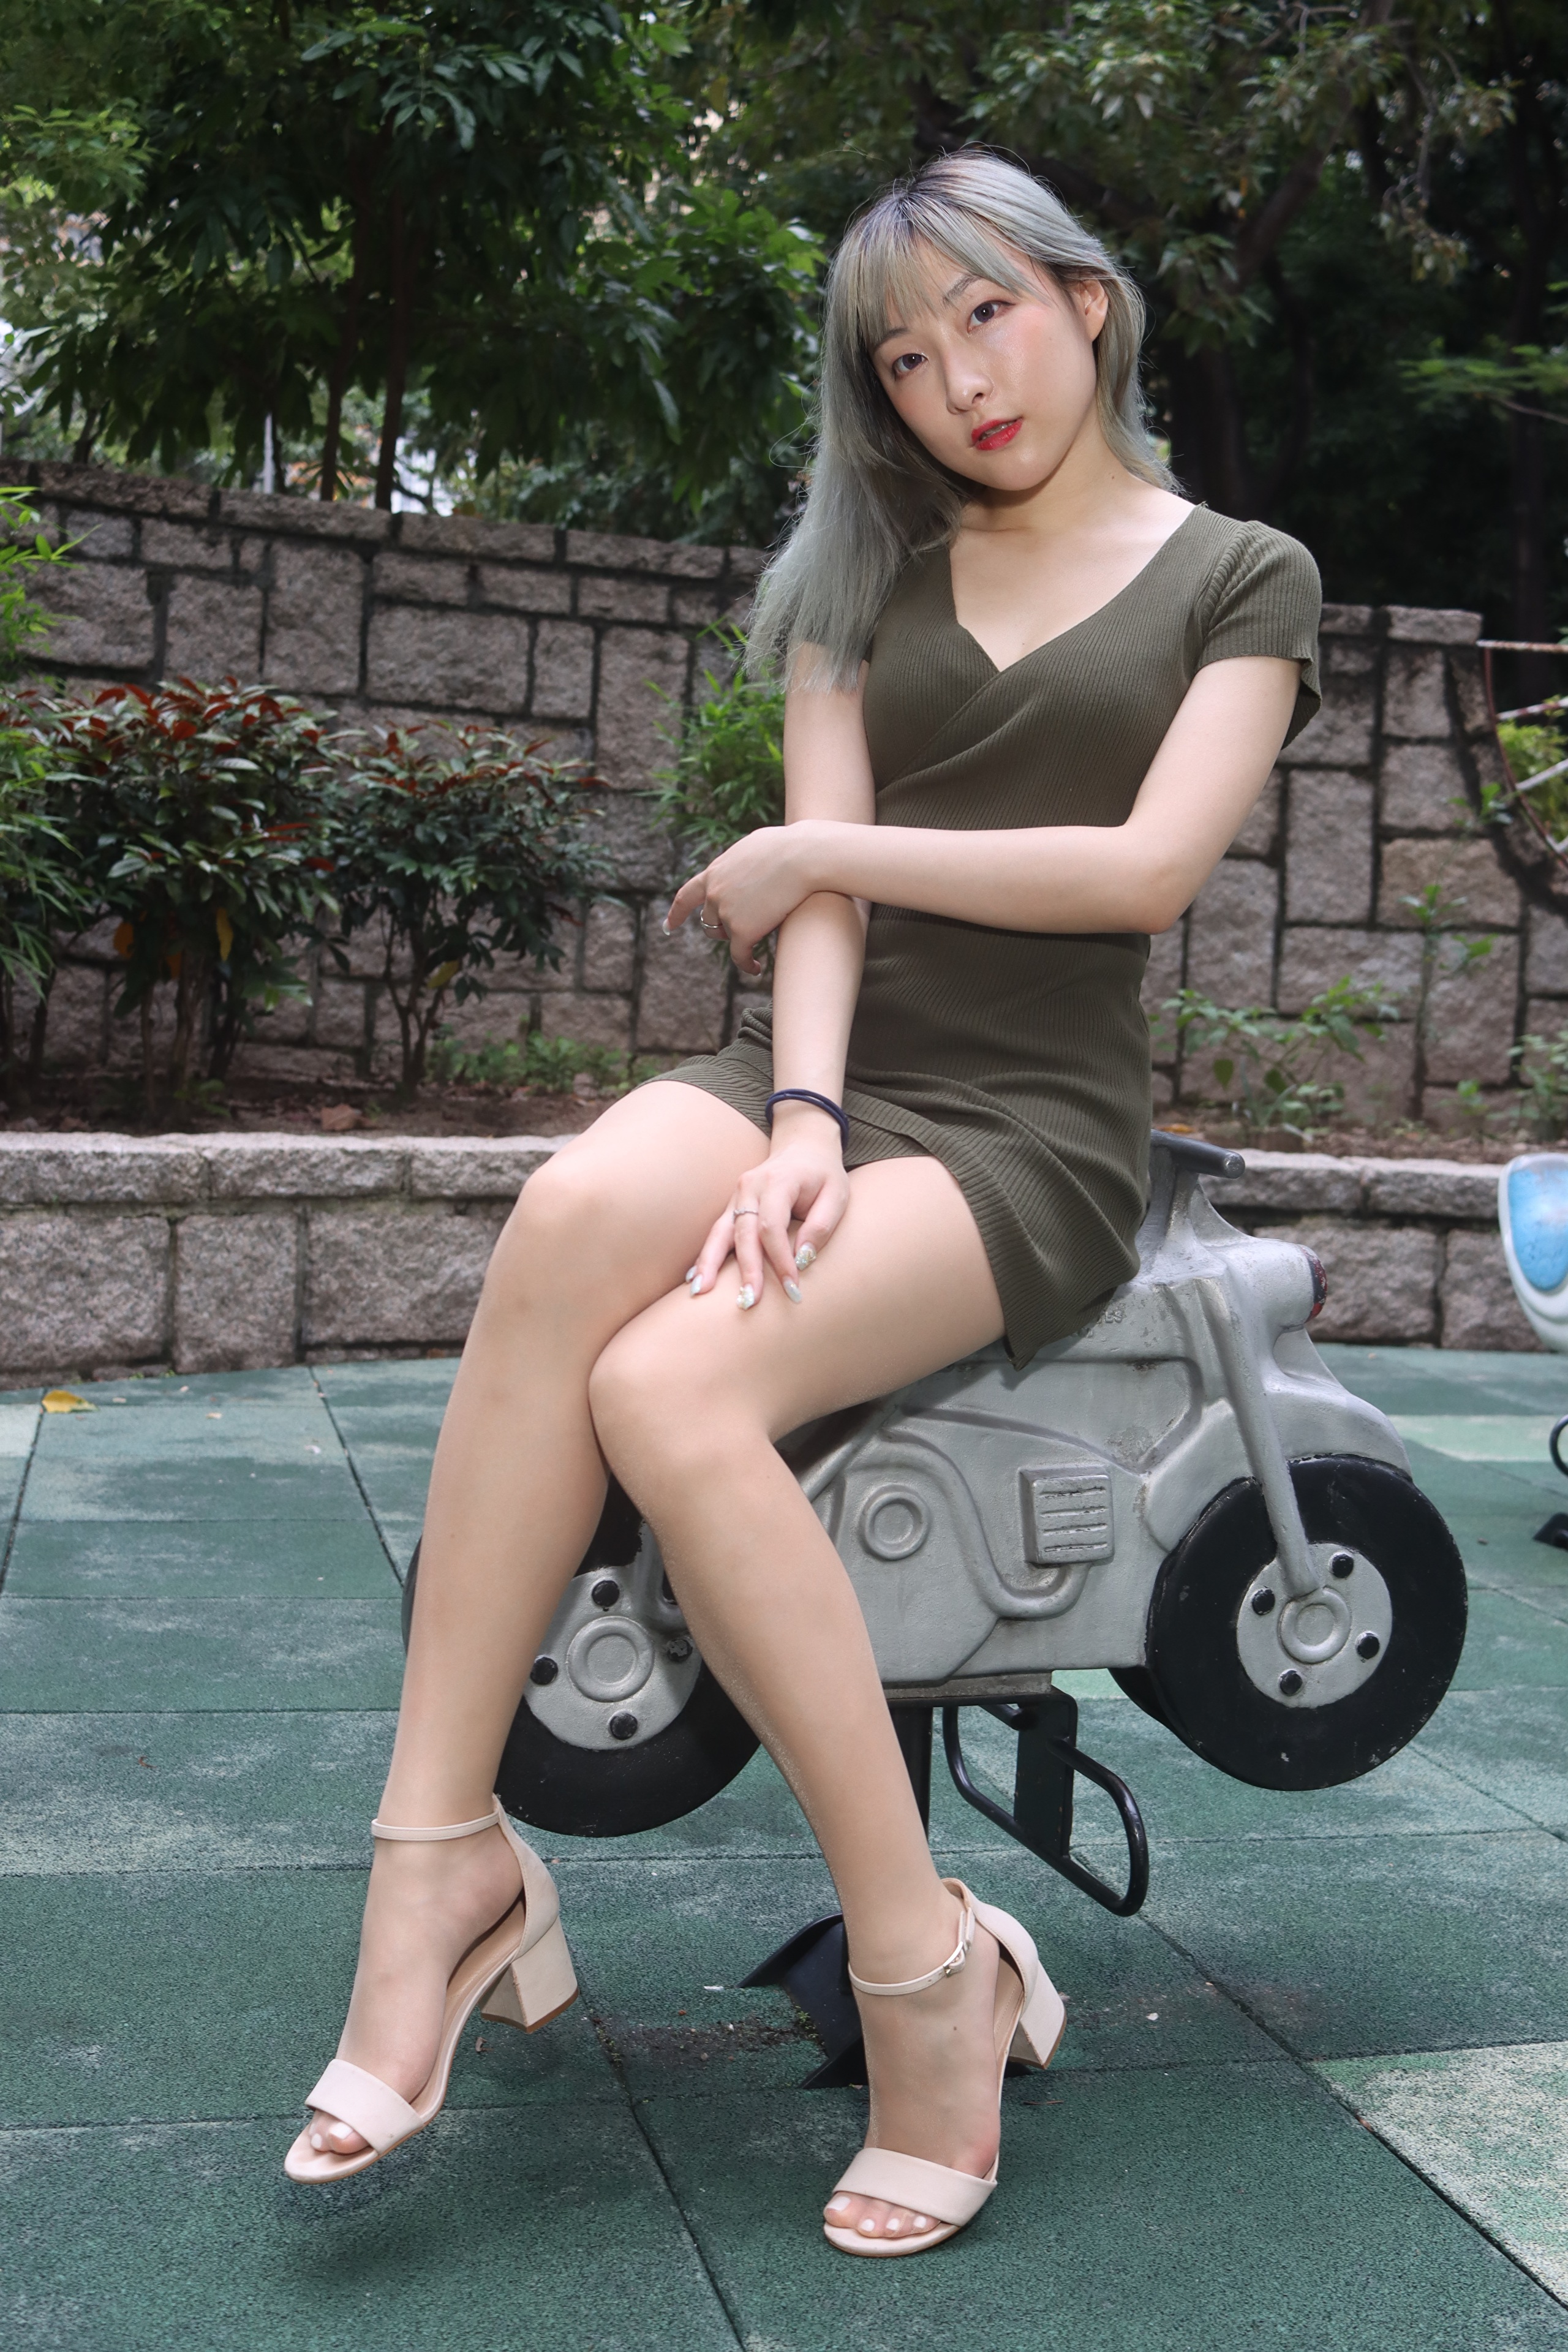 Asian Model Women Long Hair Playground Sitting Dyed Hair Bushes Trees White Shoes Bracelets Wall 2560x3840